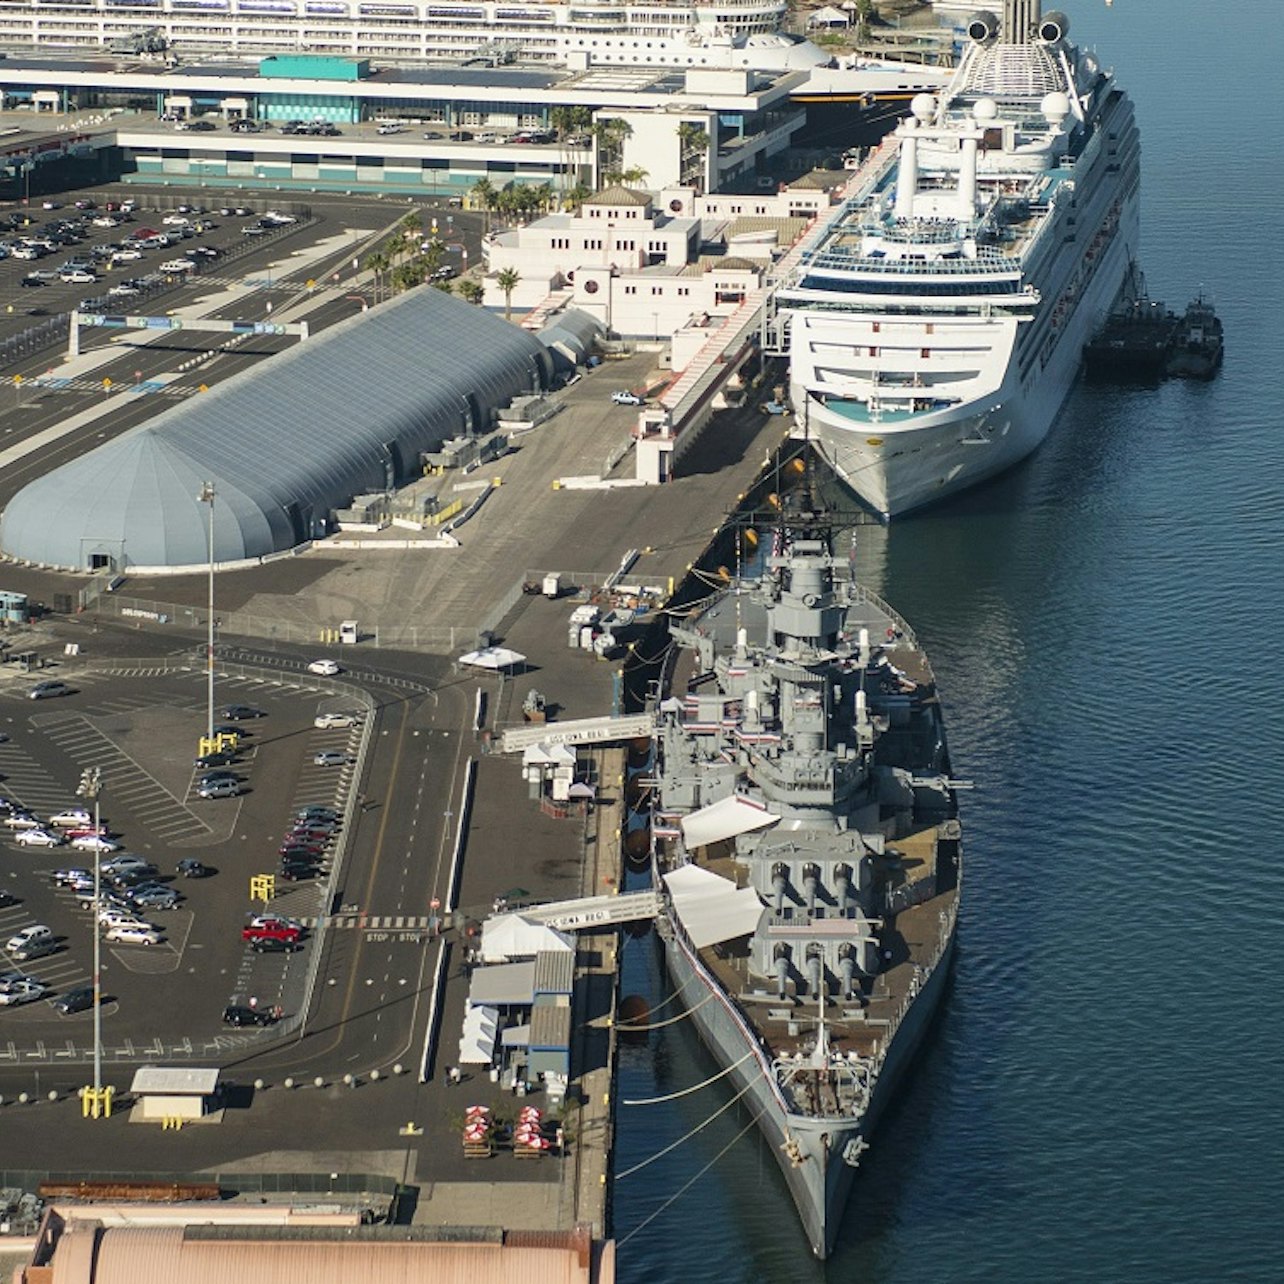 Battleship Iowa Museum: General Access Pass - Accommodations in Los Angeles